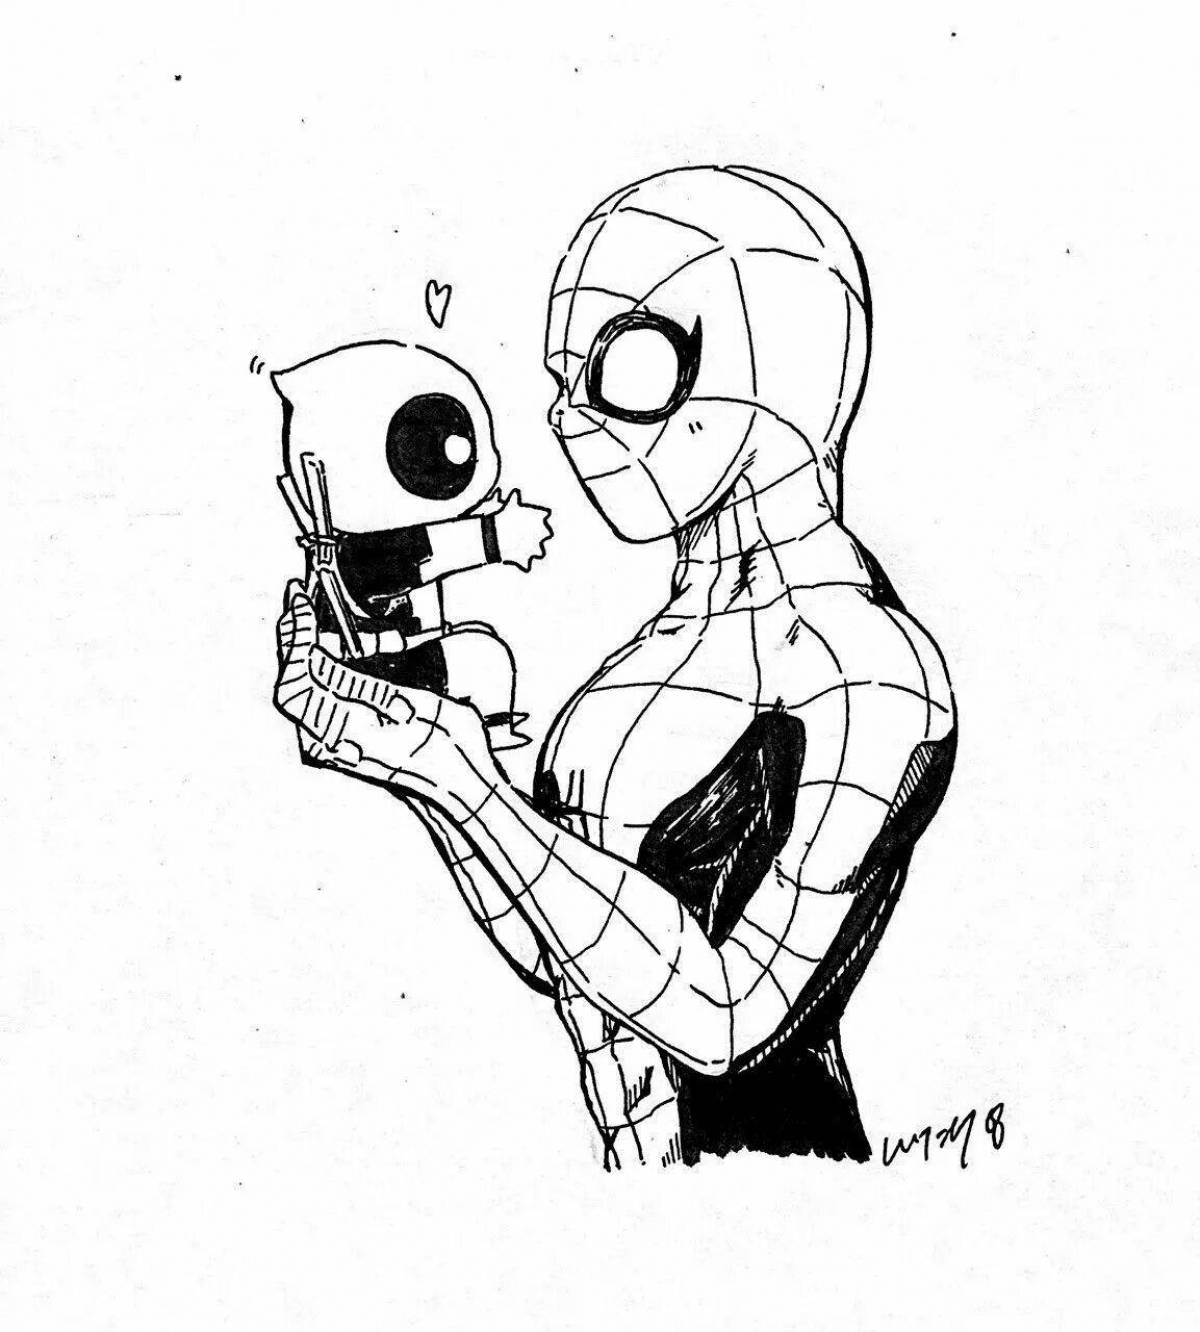 Joyful deadpool and spiderman coloring pages for kids